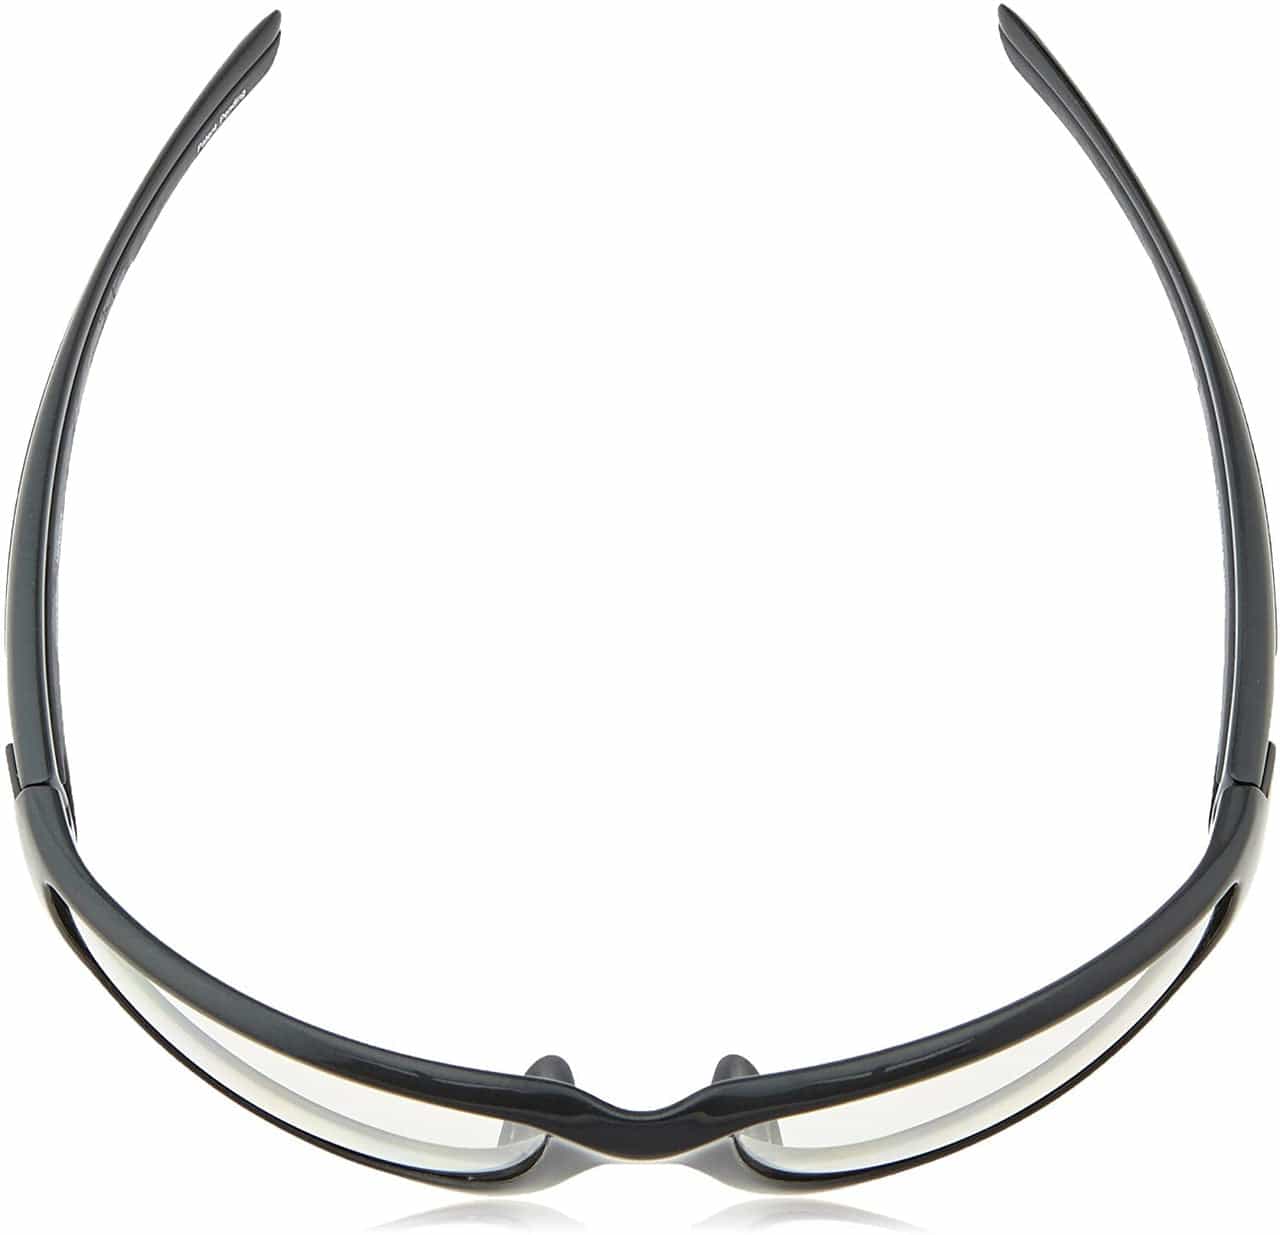 Crossfire RPG Safety Glasses 23615 Top View